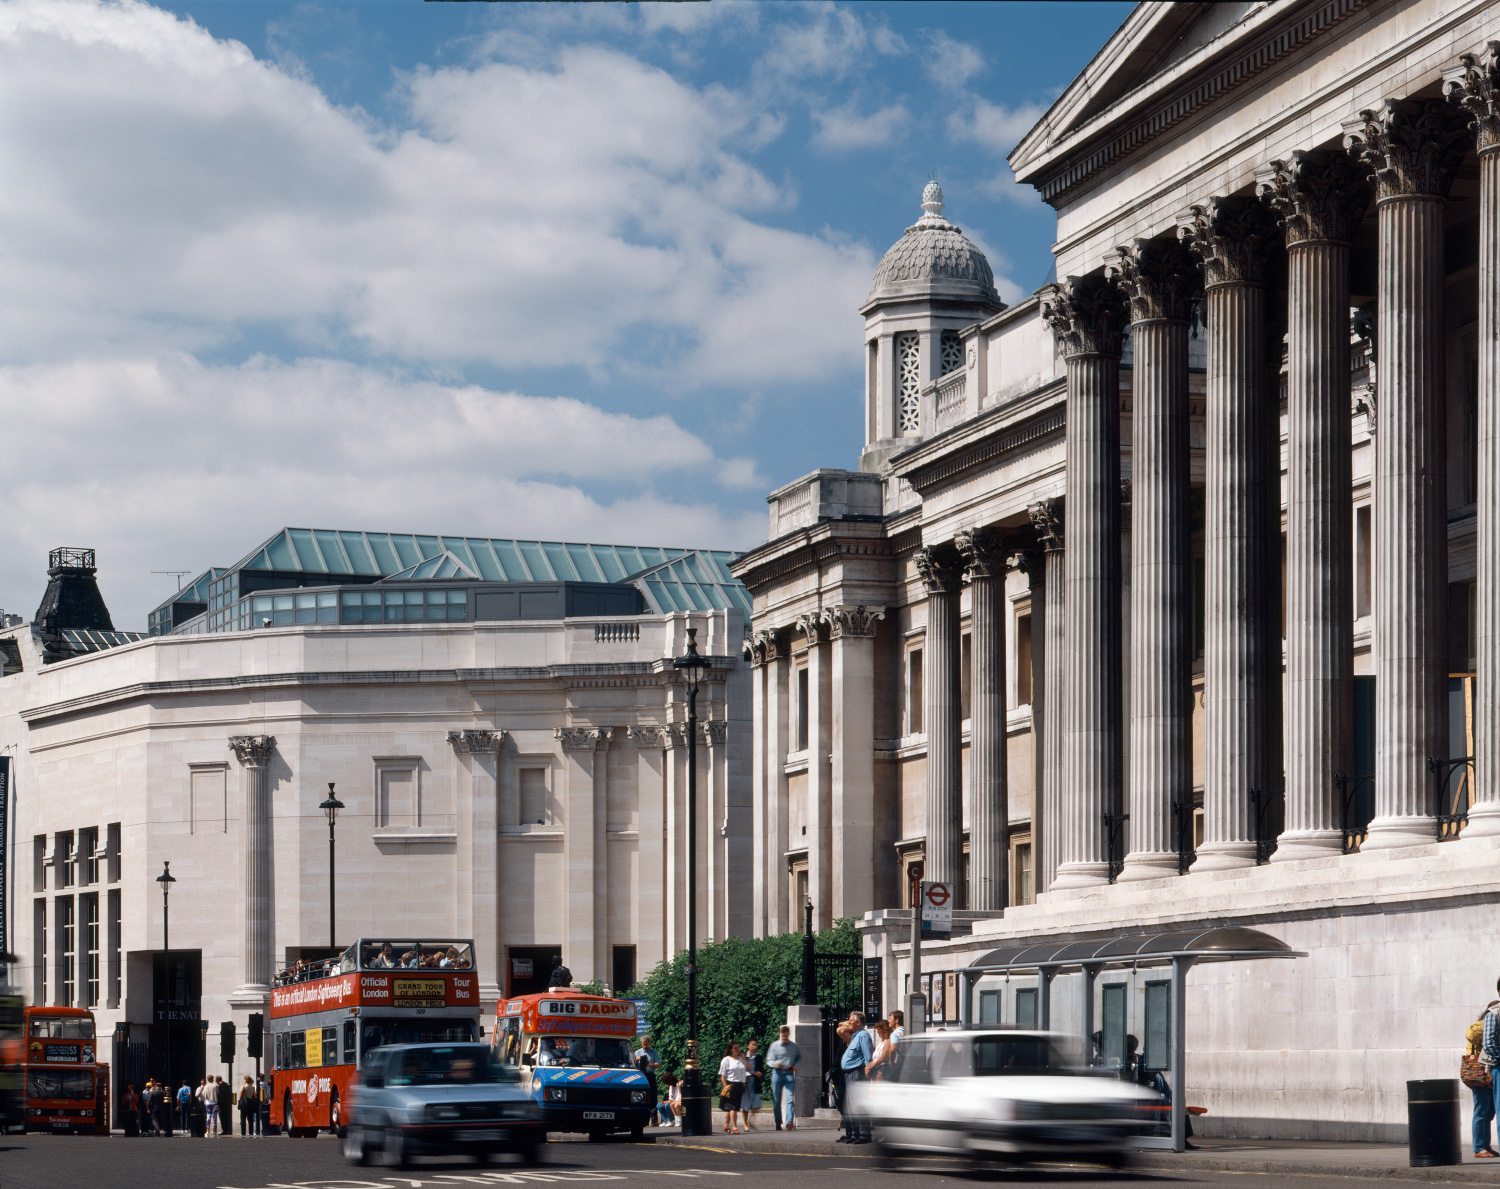 Photo of The National Gallery Sainsbury Wing